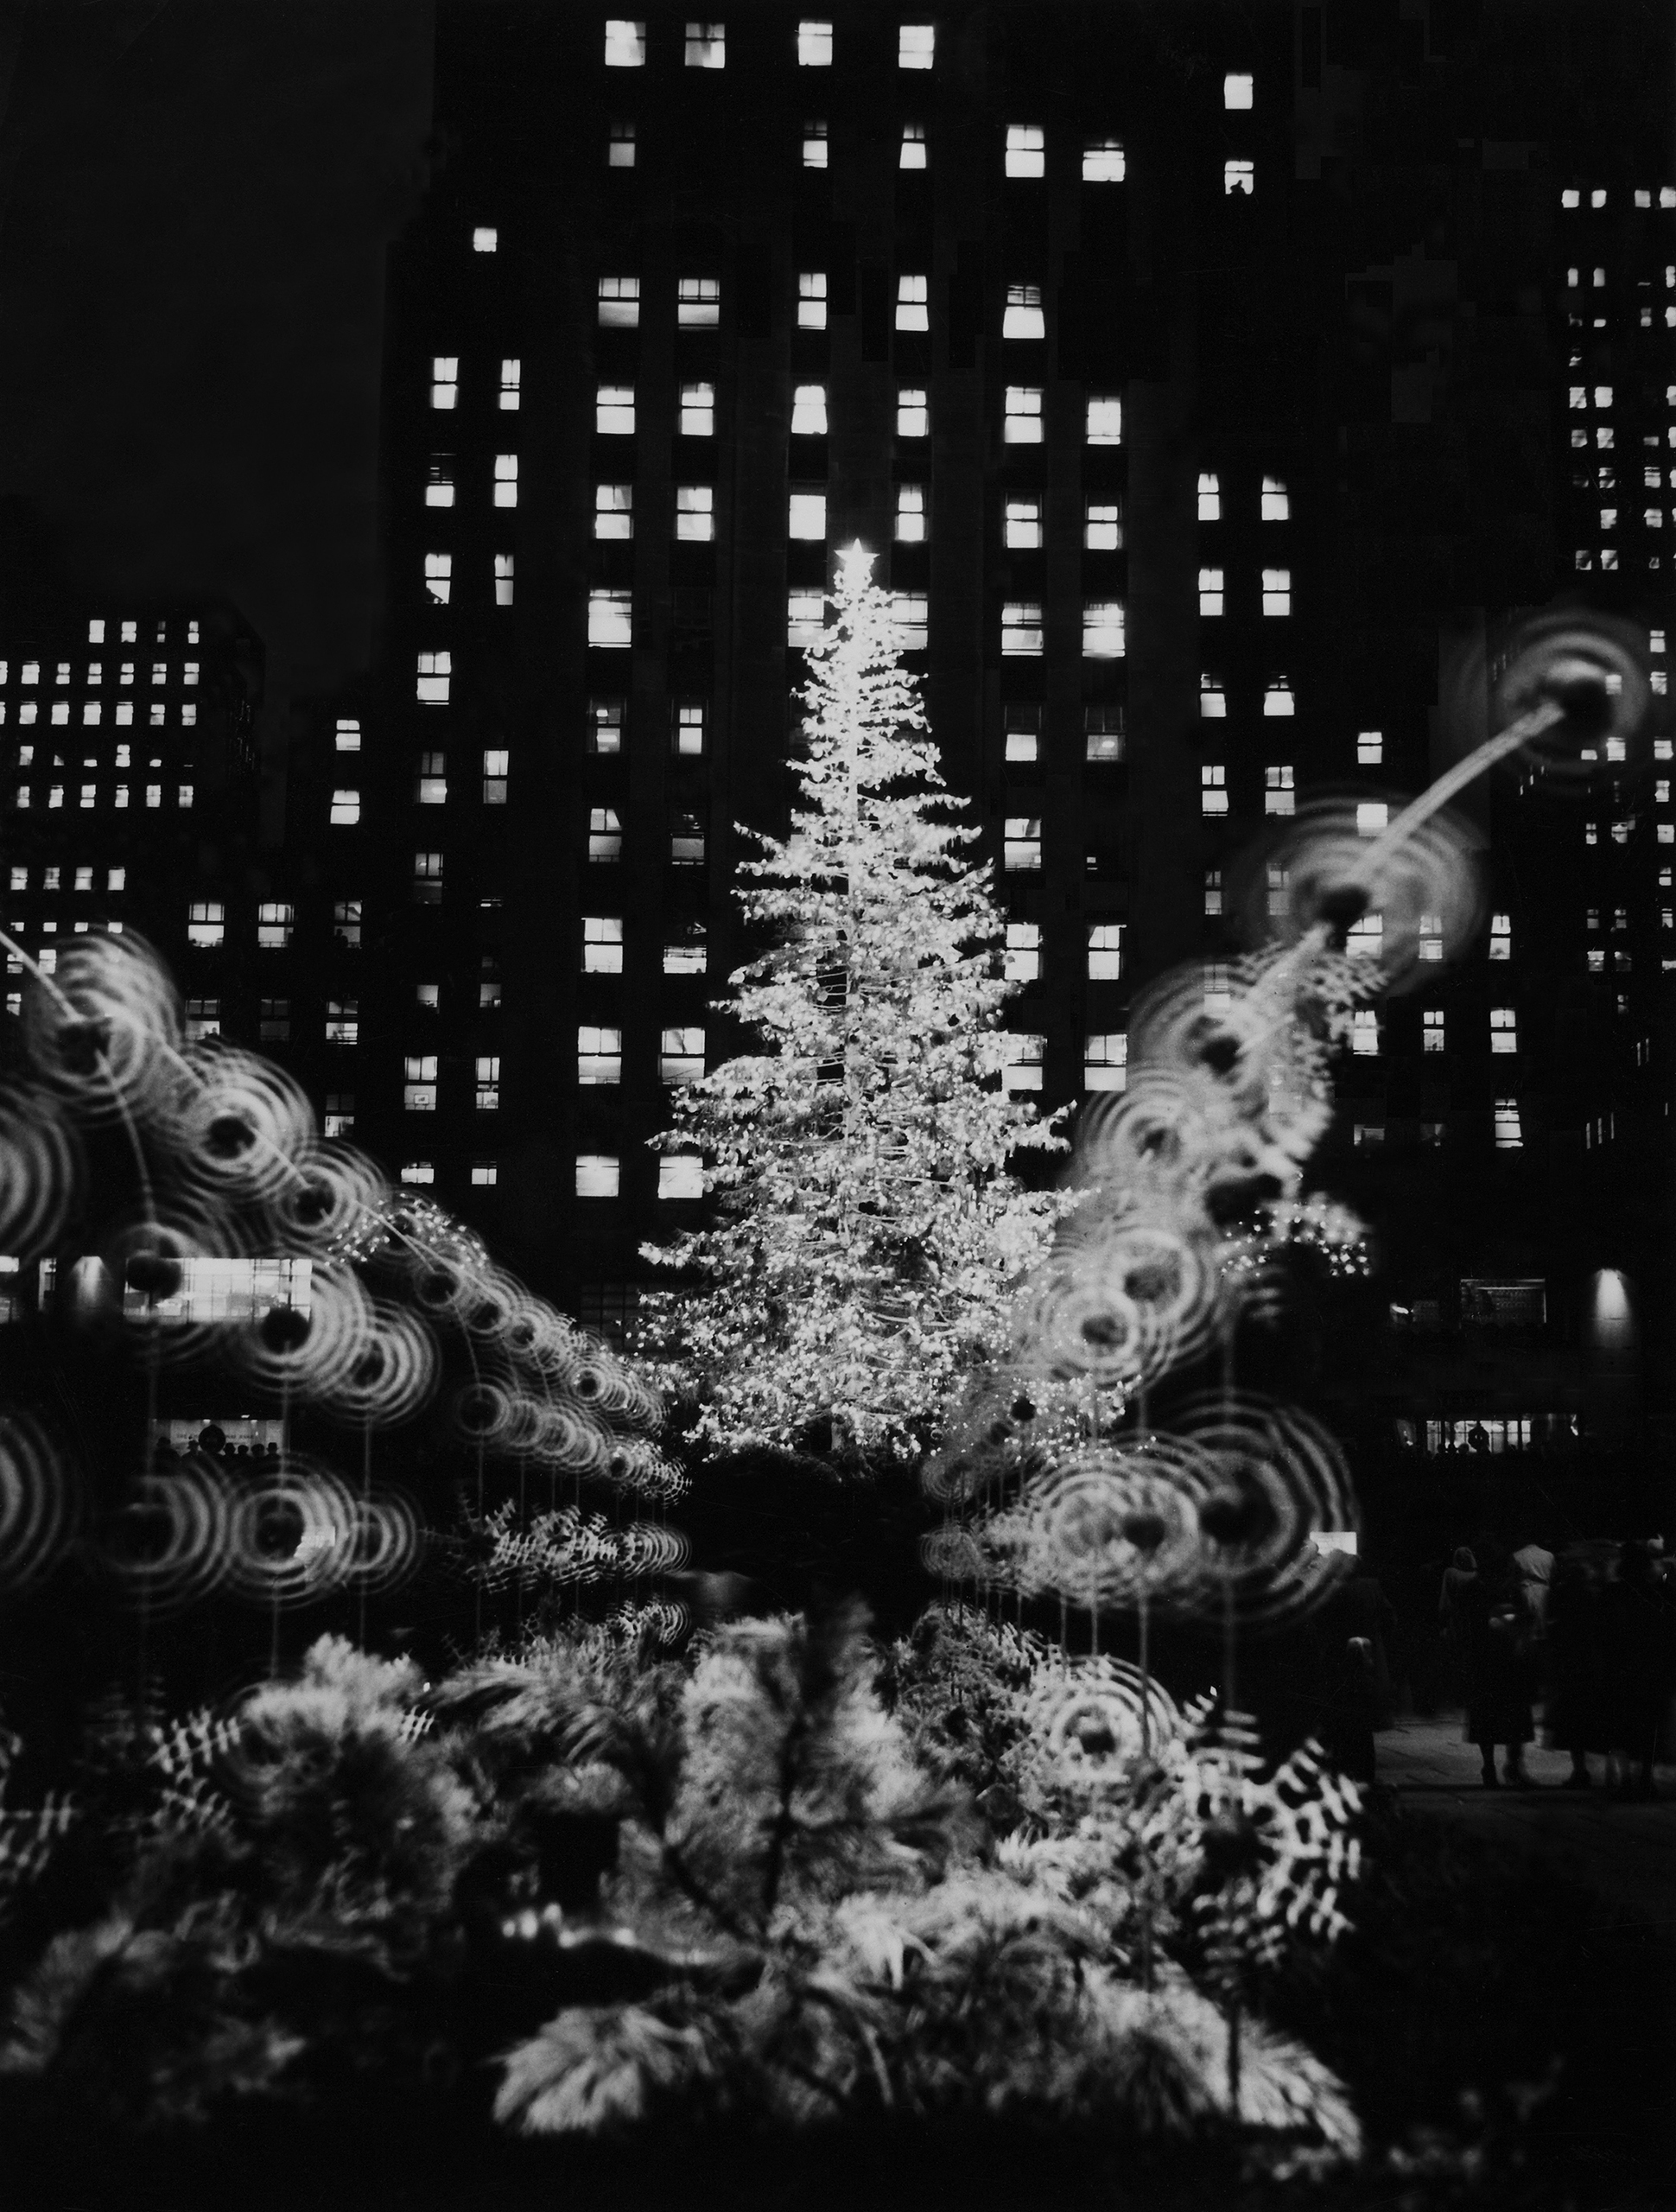 Joyful and Eerie Photo of Christmas in Black and White